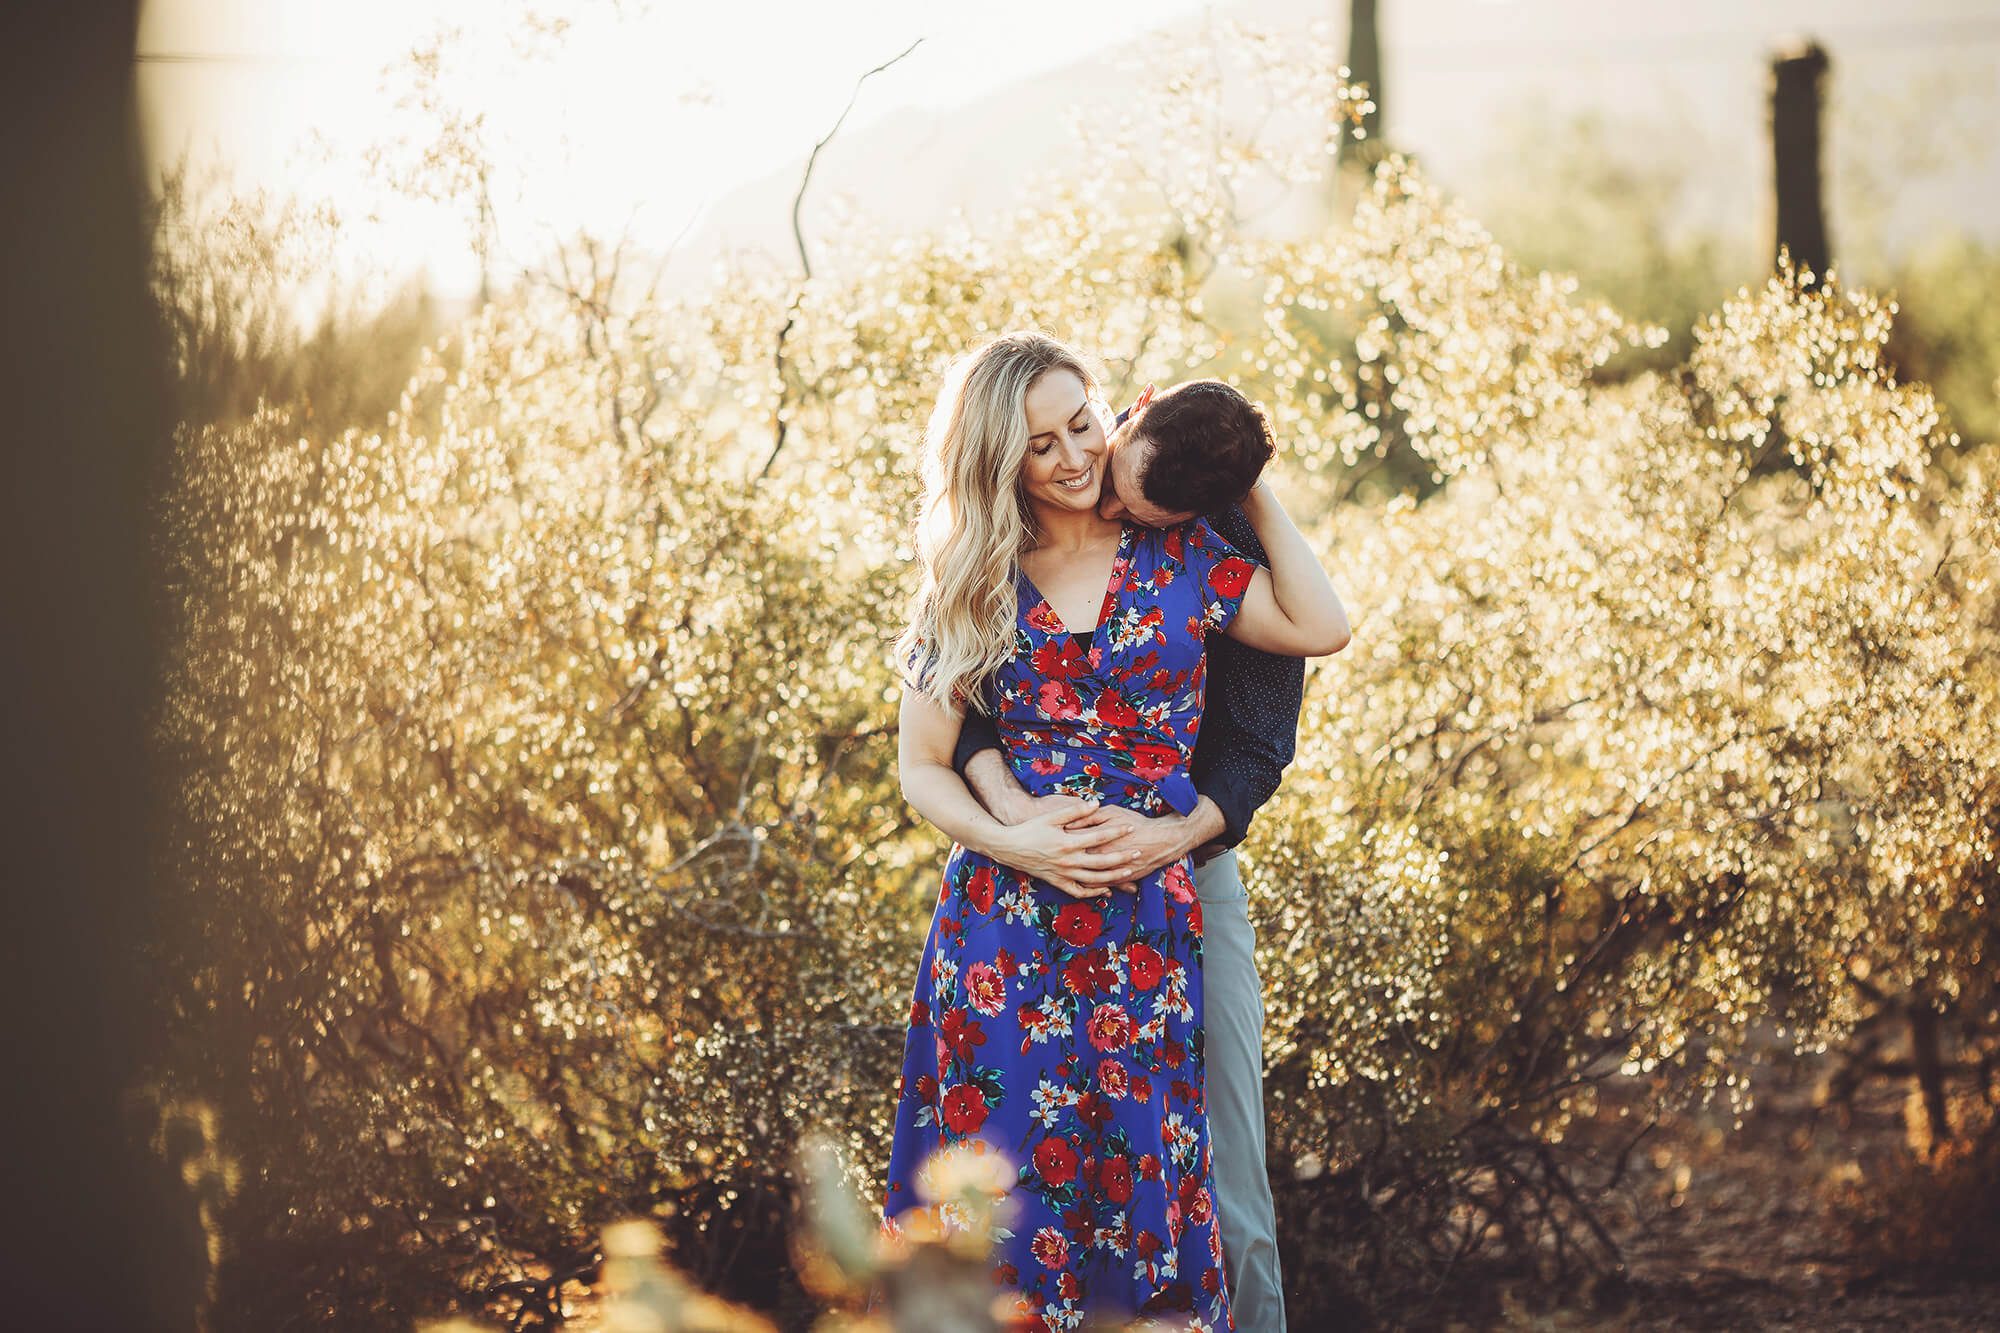 Shaun kisses Ally's neck surrounded by spring desert plants during their sunset engagement session